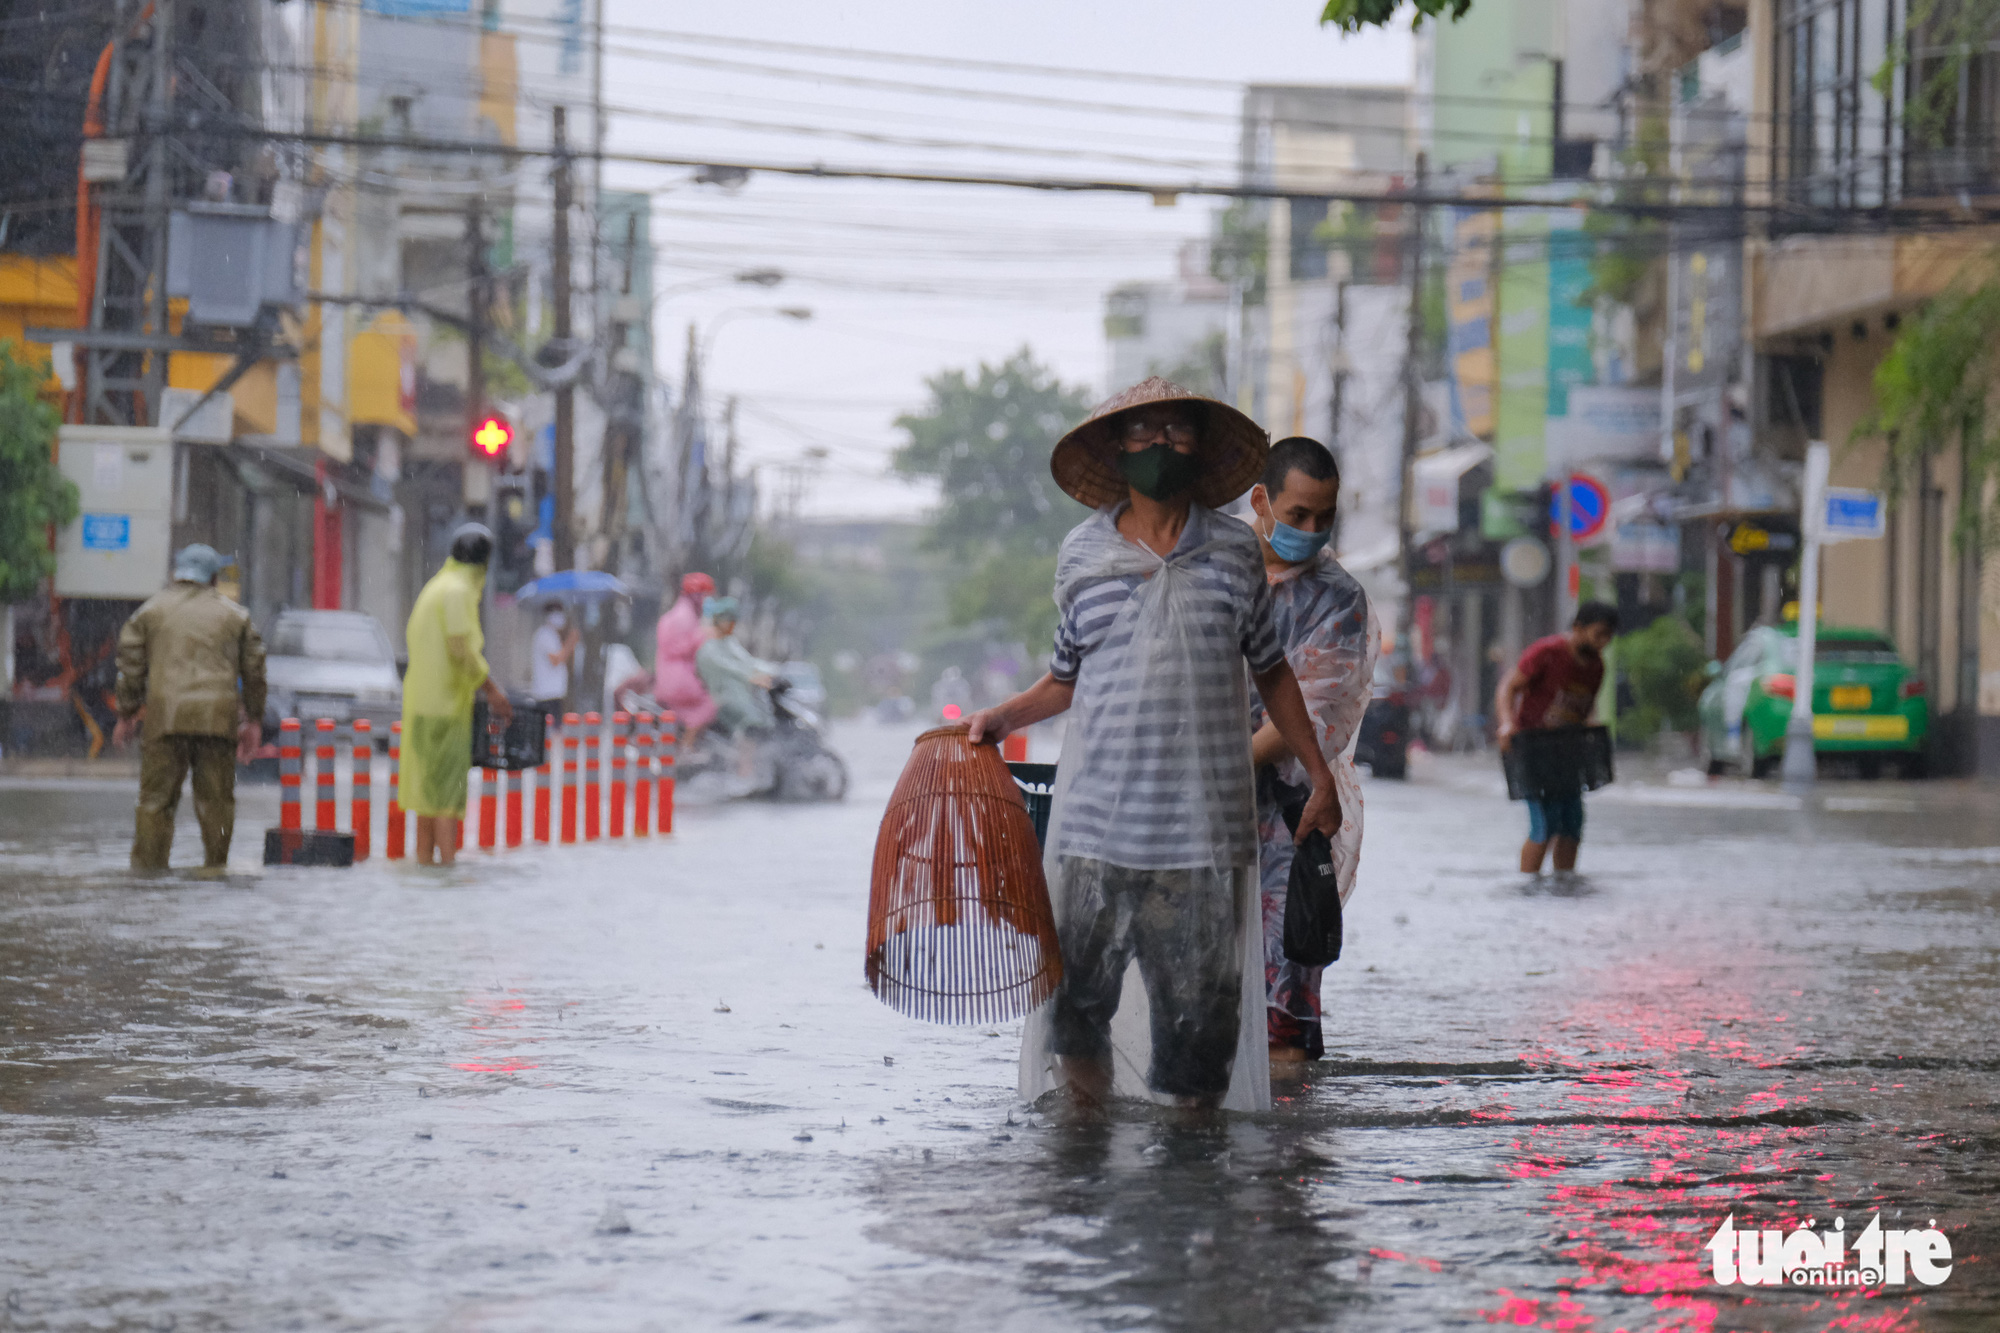 In Da Nang, people catch fish on deluged downtown streets